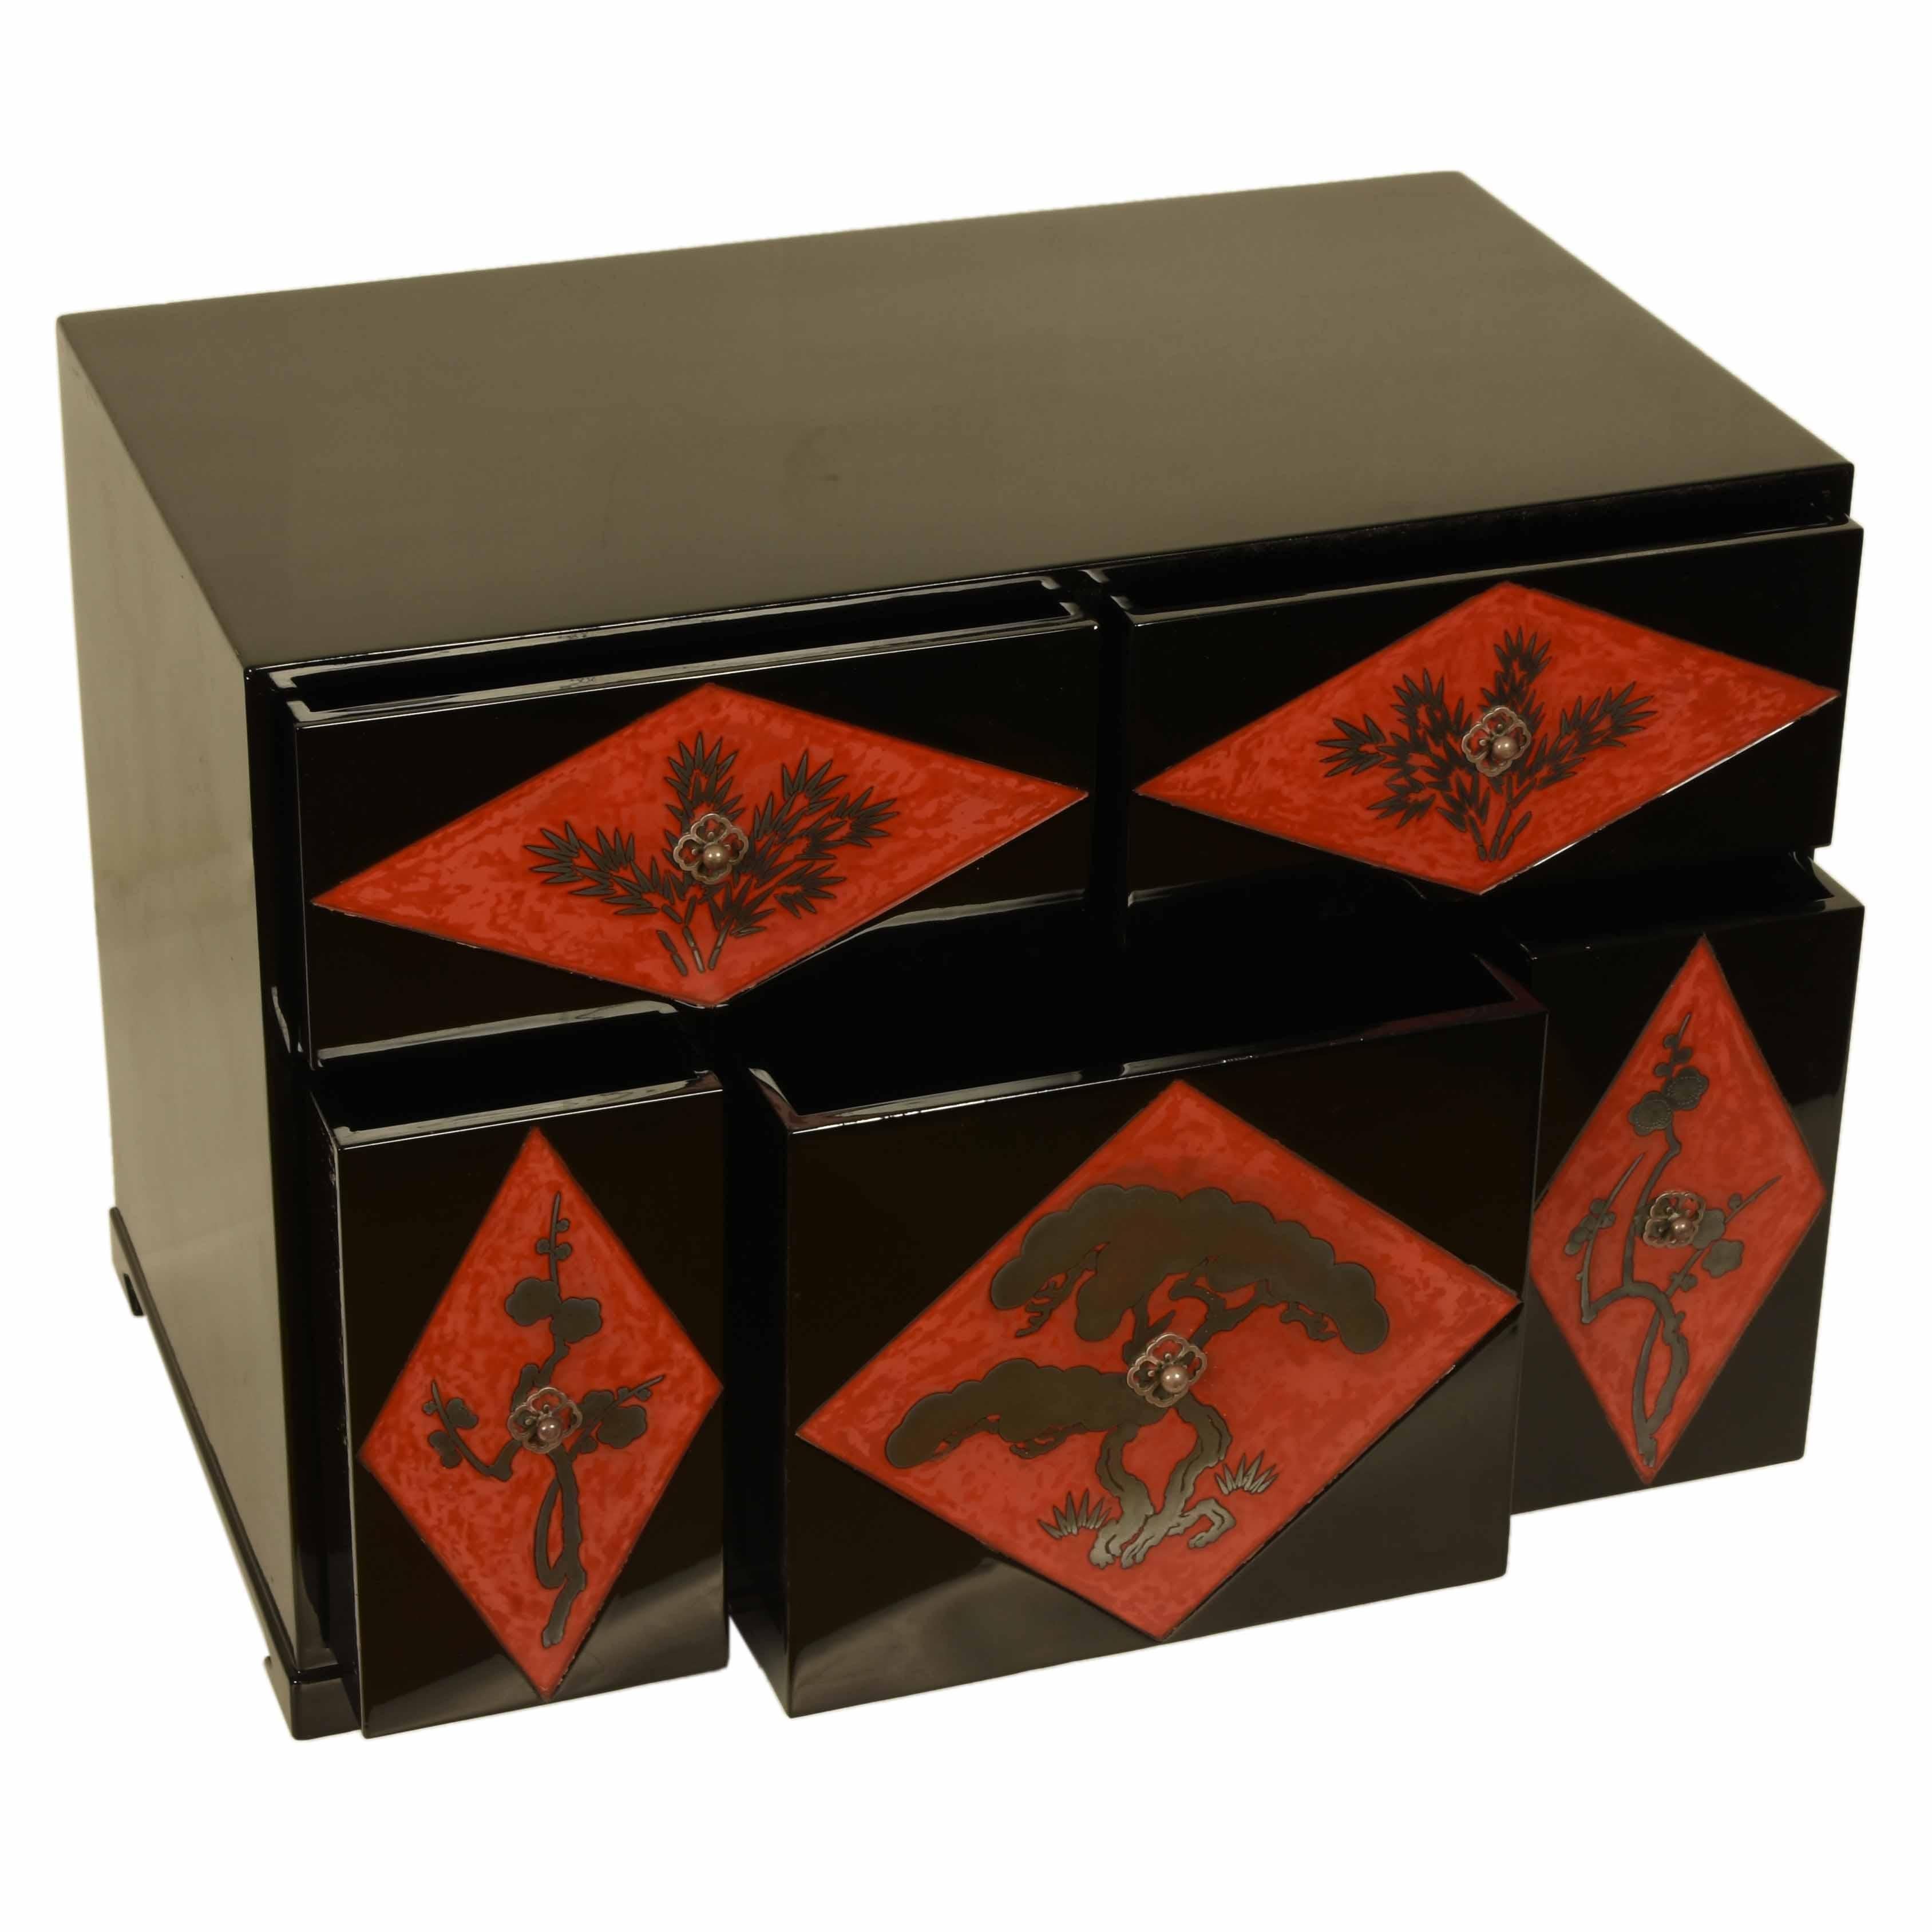 An antique Japanese, five drawer, black lacquered small chest. It features a pine and blossom decoration in silver maki e on each drawer front, outlined in graphic red lacquer diamond backgrounds. The hardware is equally decorative silver drawer